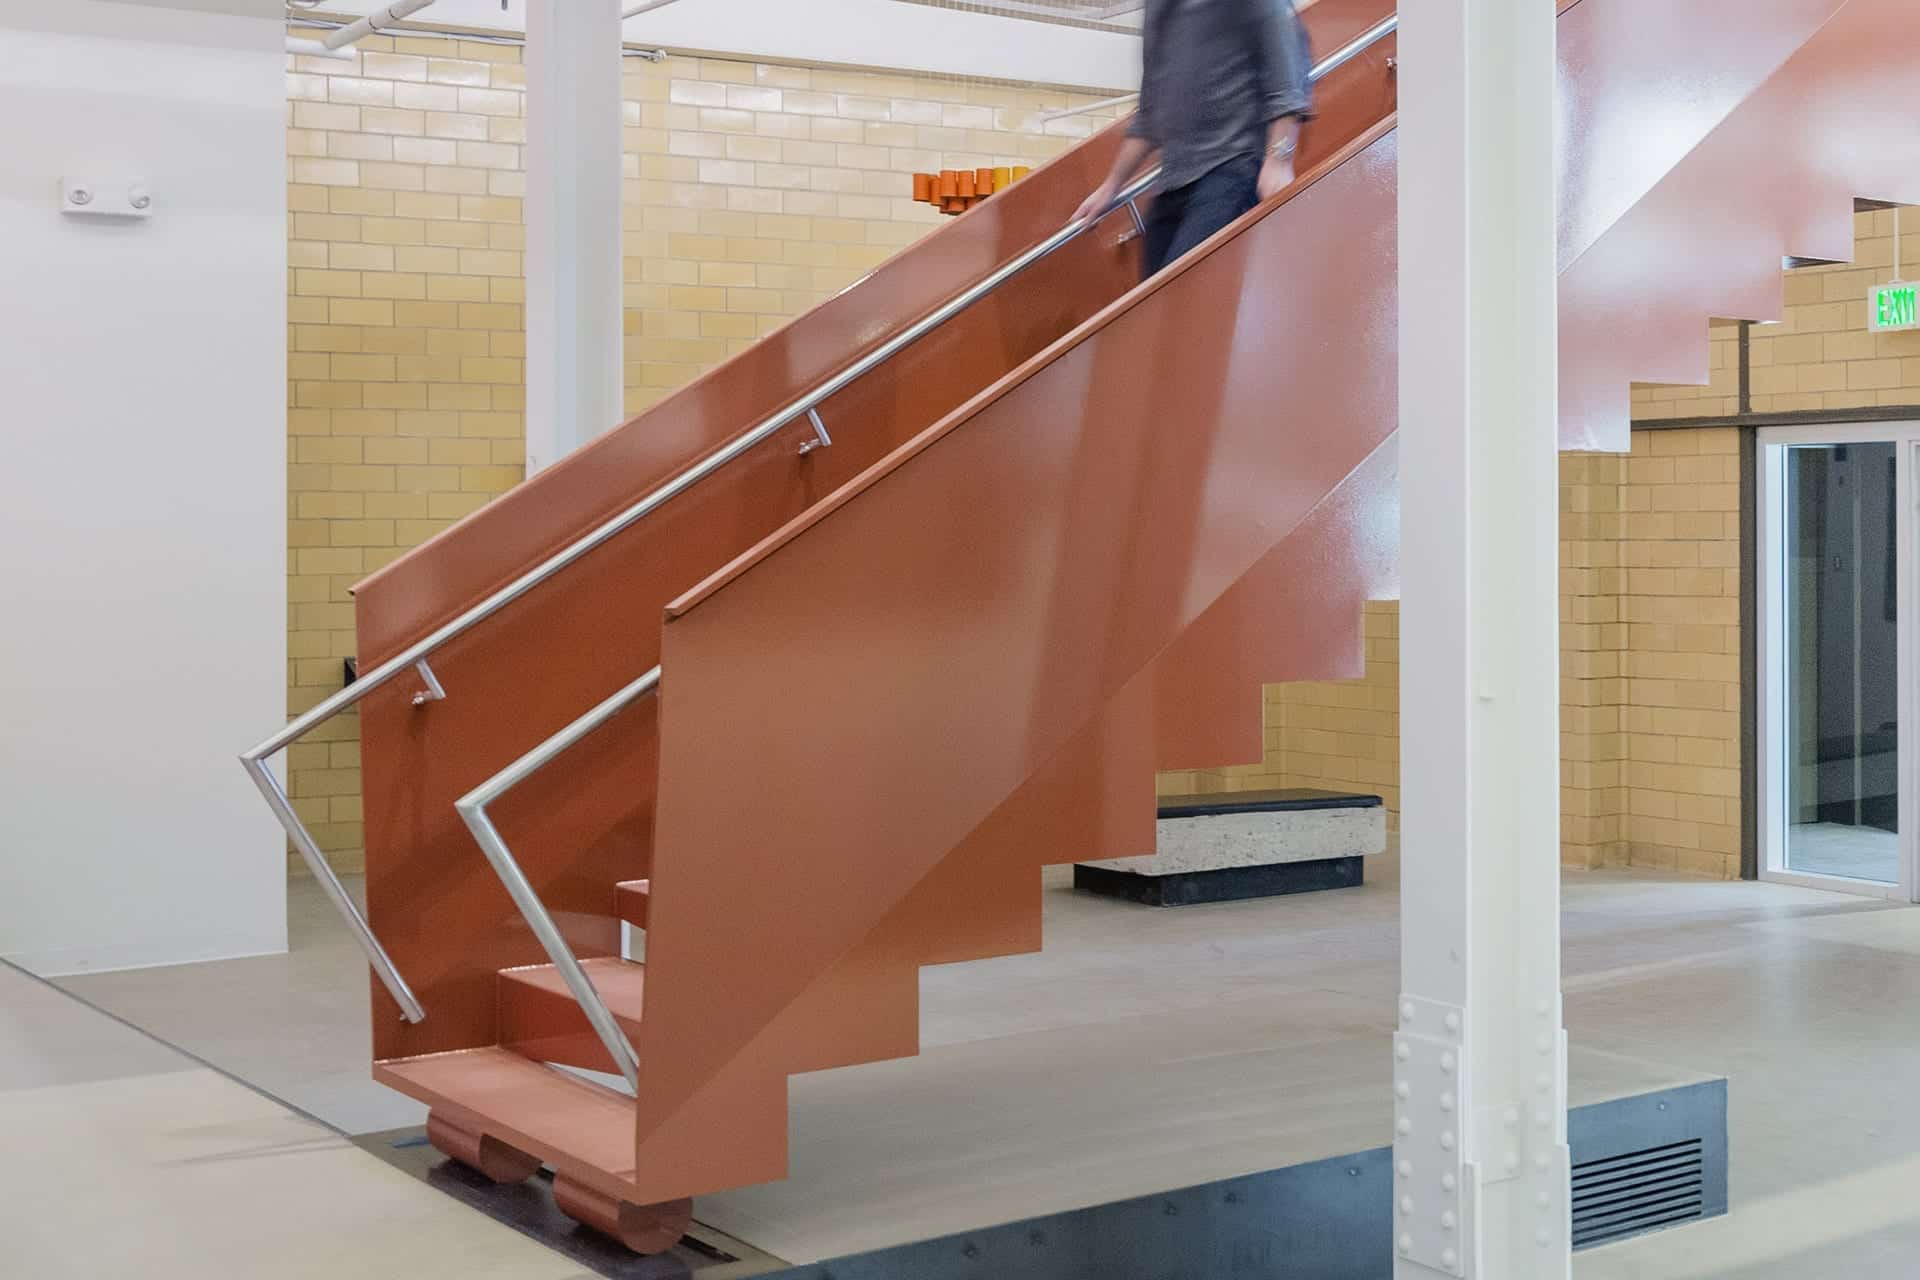 The design includes a clever handrail extension, meeting ADA requirements.